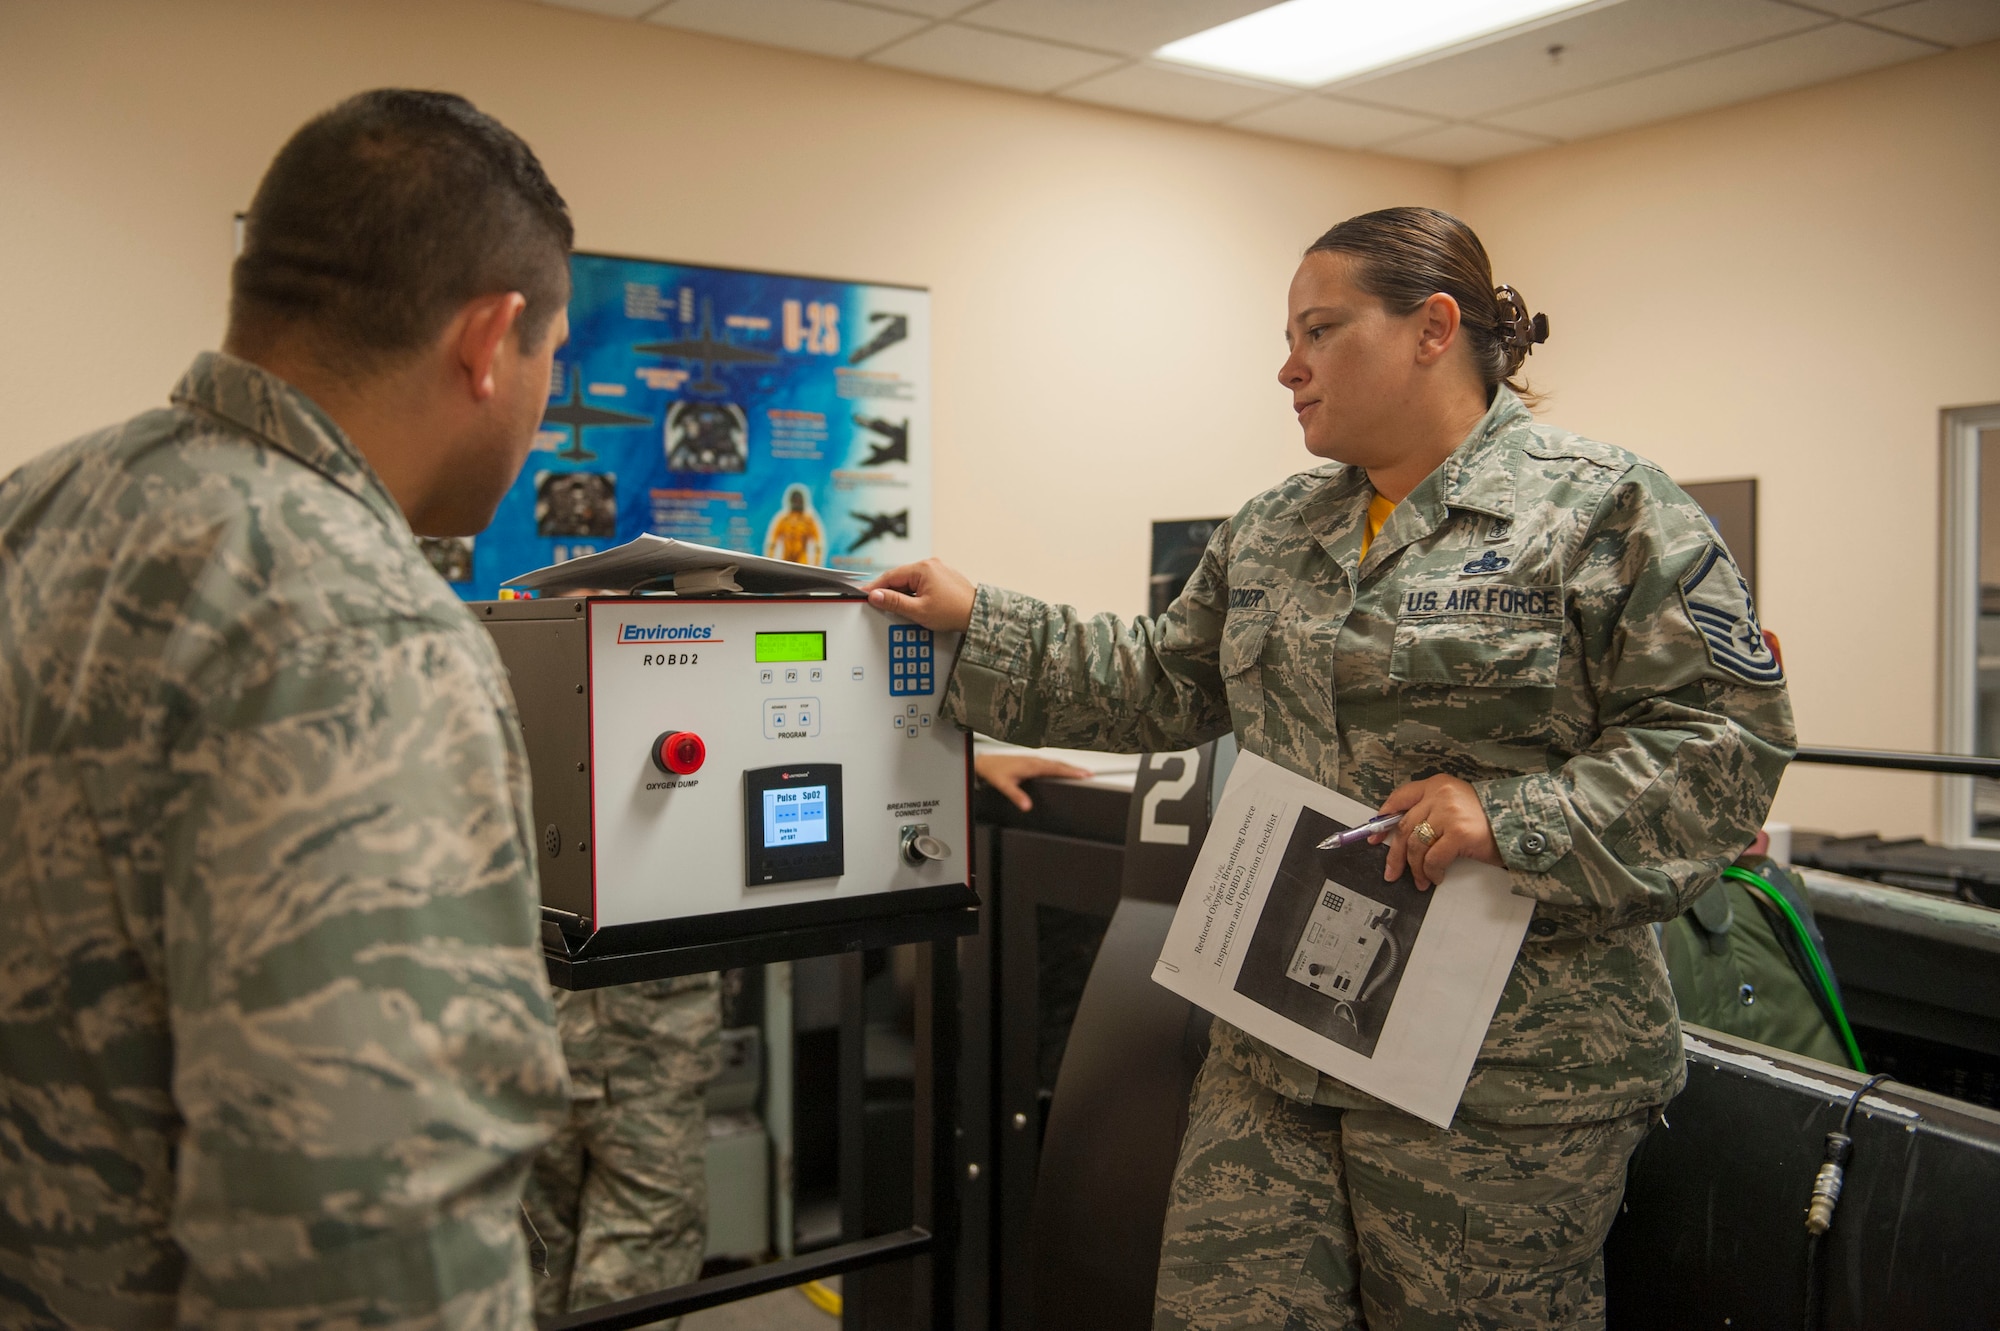 Master Sgt. Jennifer Flecker, 9th Physiological Support Squadron support flight chief, runs through the initial process of turning on and preparing a Reduced Oxygen Breathing Device for a hypoxia demonstration.